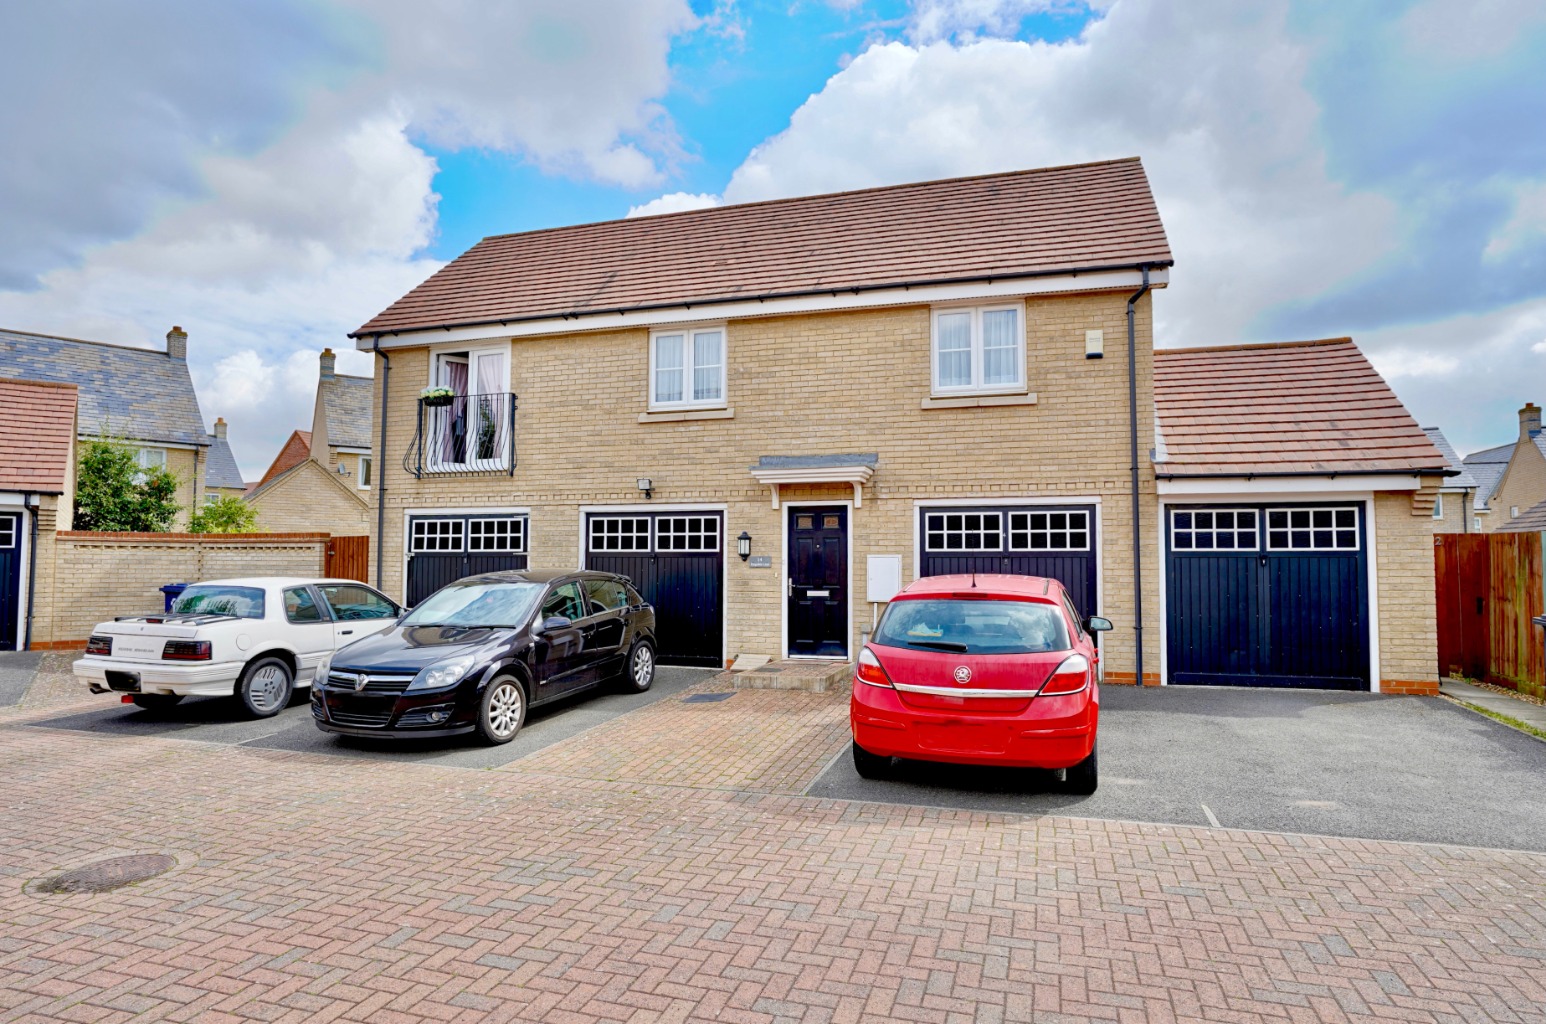 2 bed detached house for sale in Hogsden Leys, St. Neots - Property Image 1